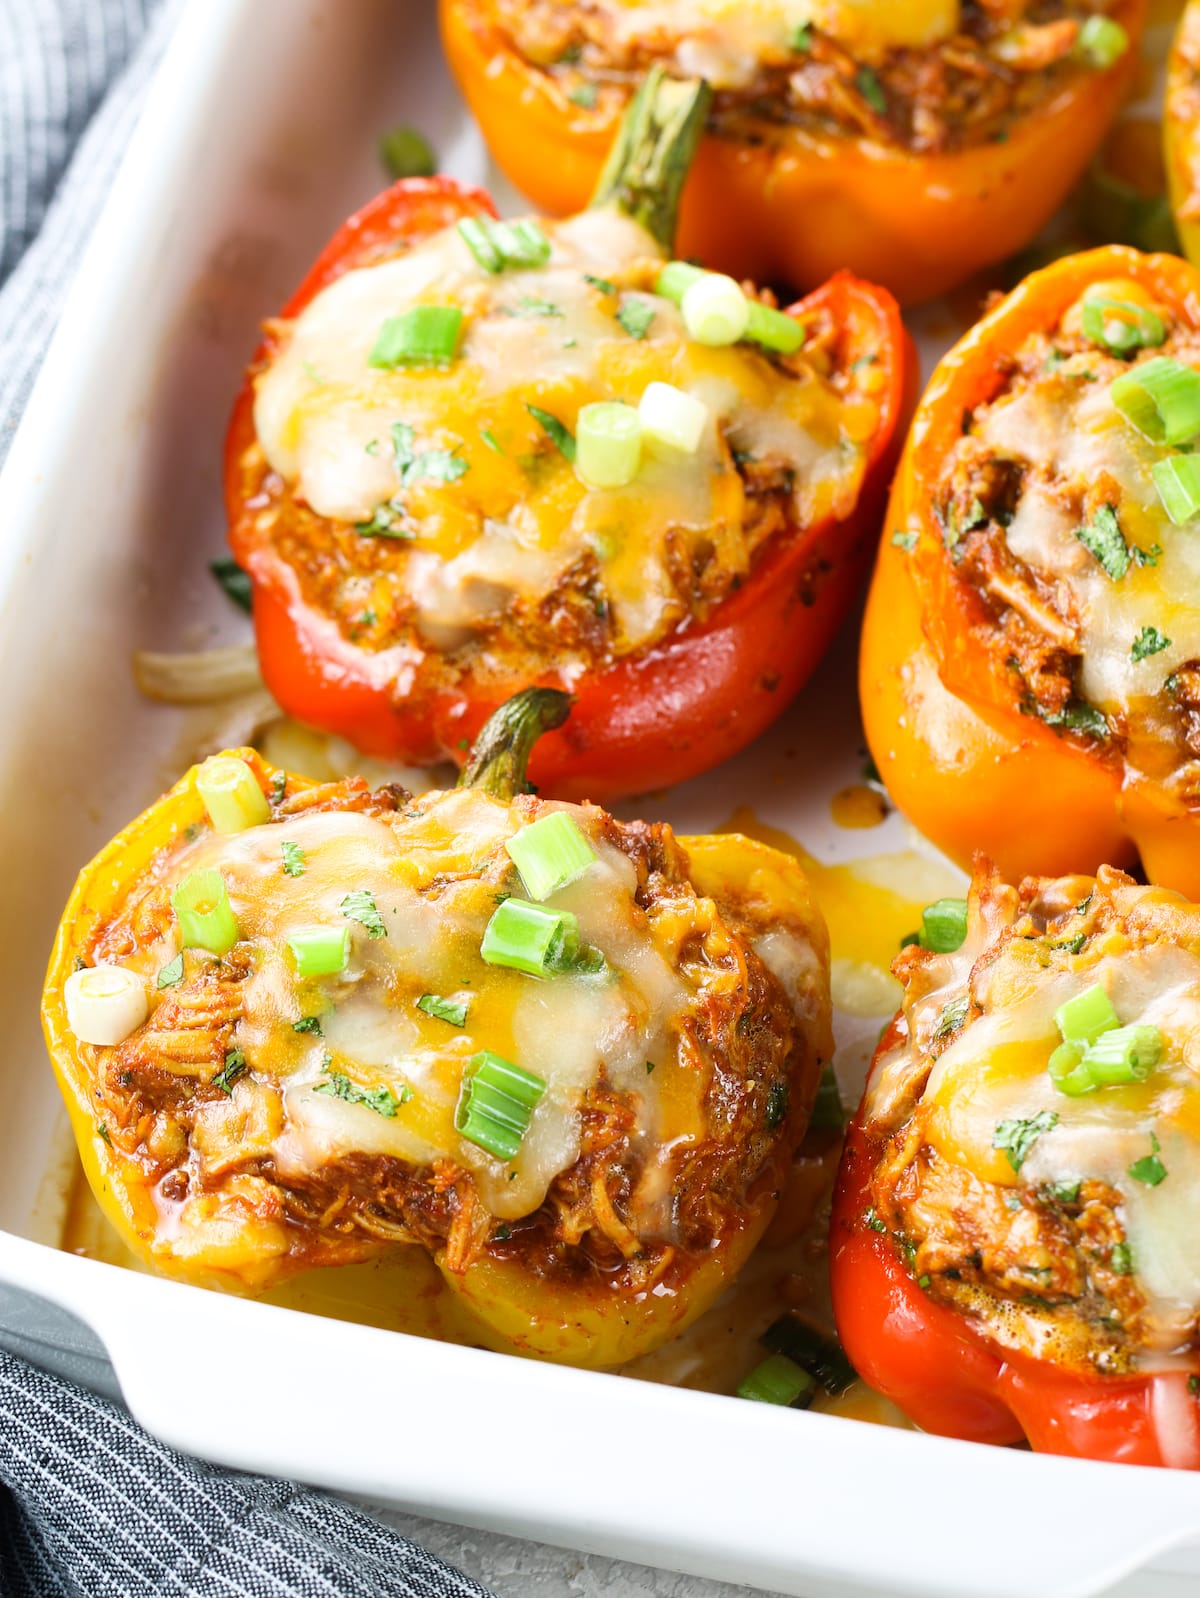 Mexican shredded stuffed peppers cooked with cheese and sliced green onions on top.